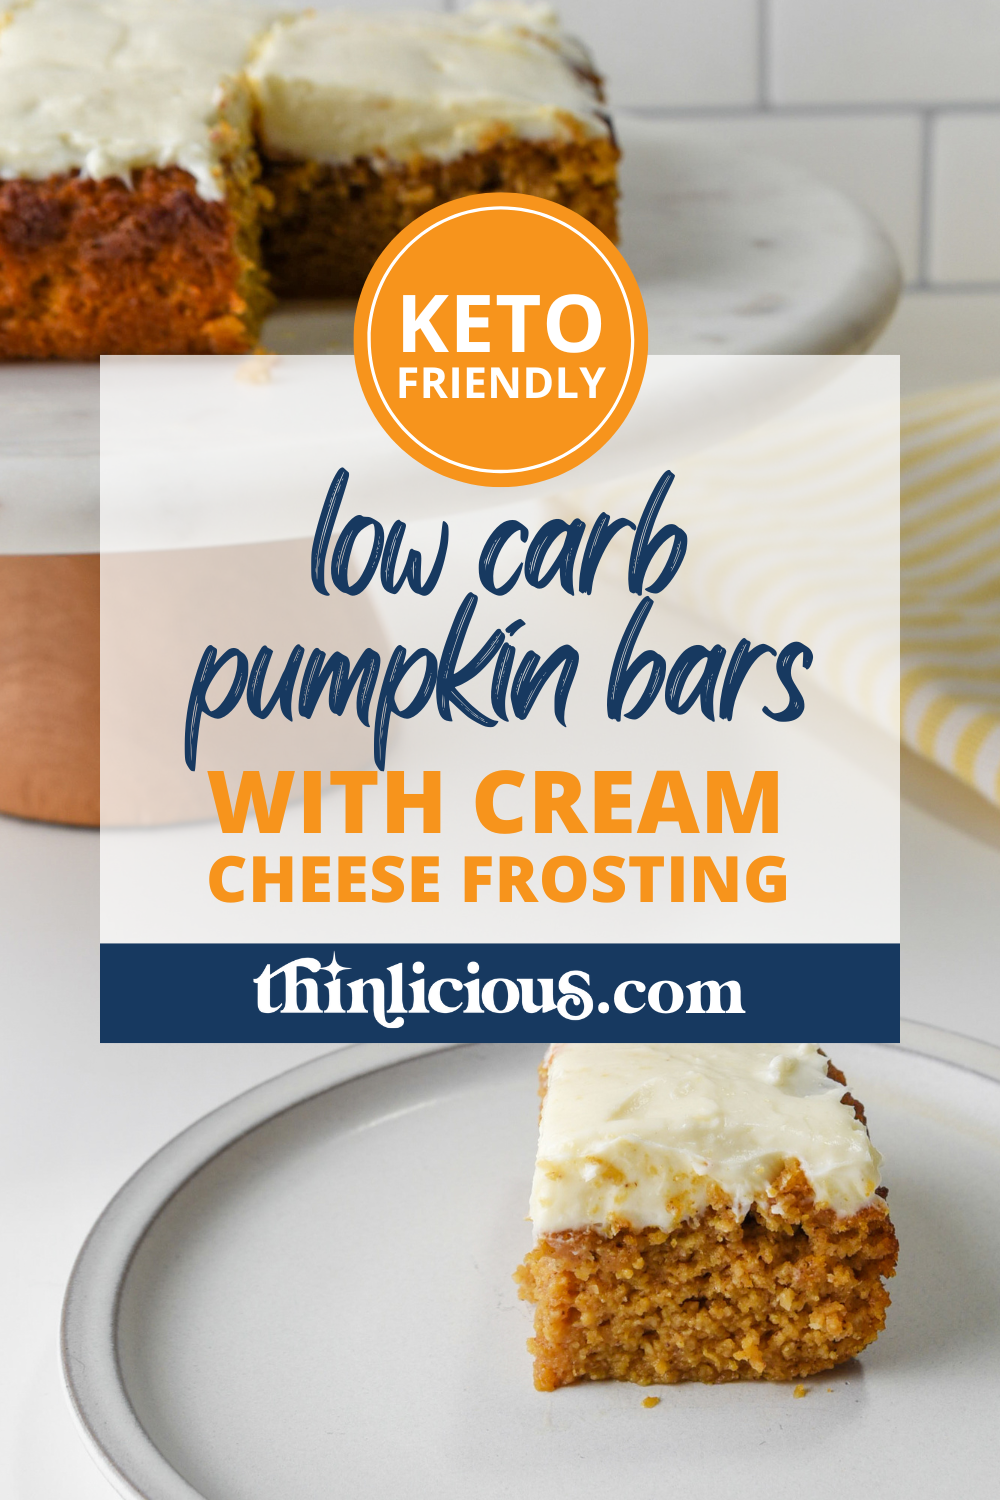 Fall is all about pumpkins! These pumpkin cheesecake bars are low-carb, gluten-free, and so rich and creamy you'll swear they are filled with sugar.